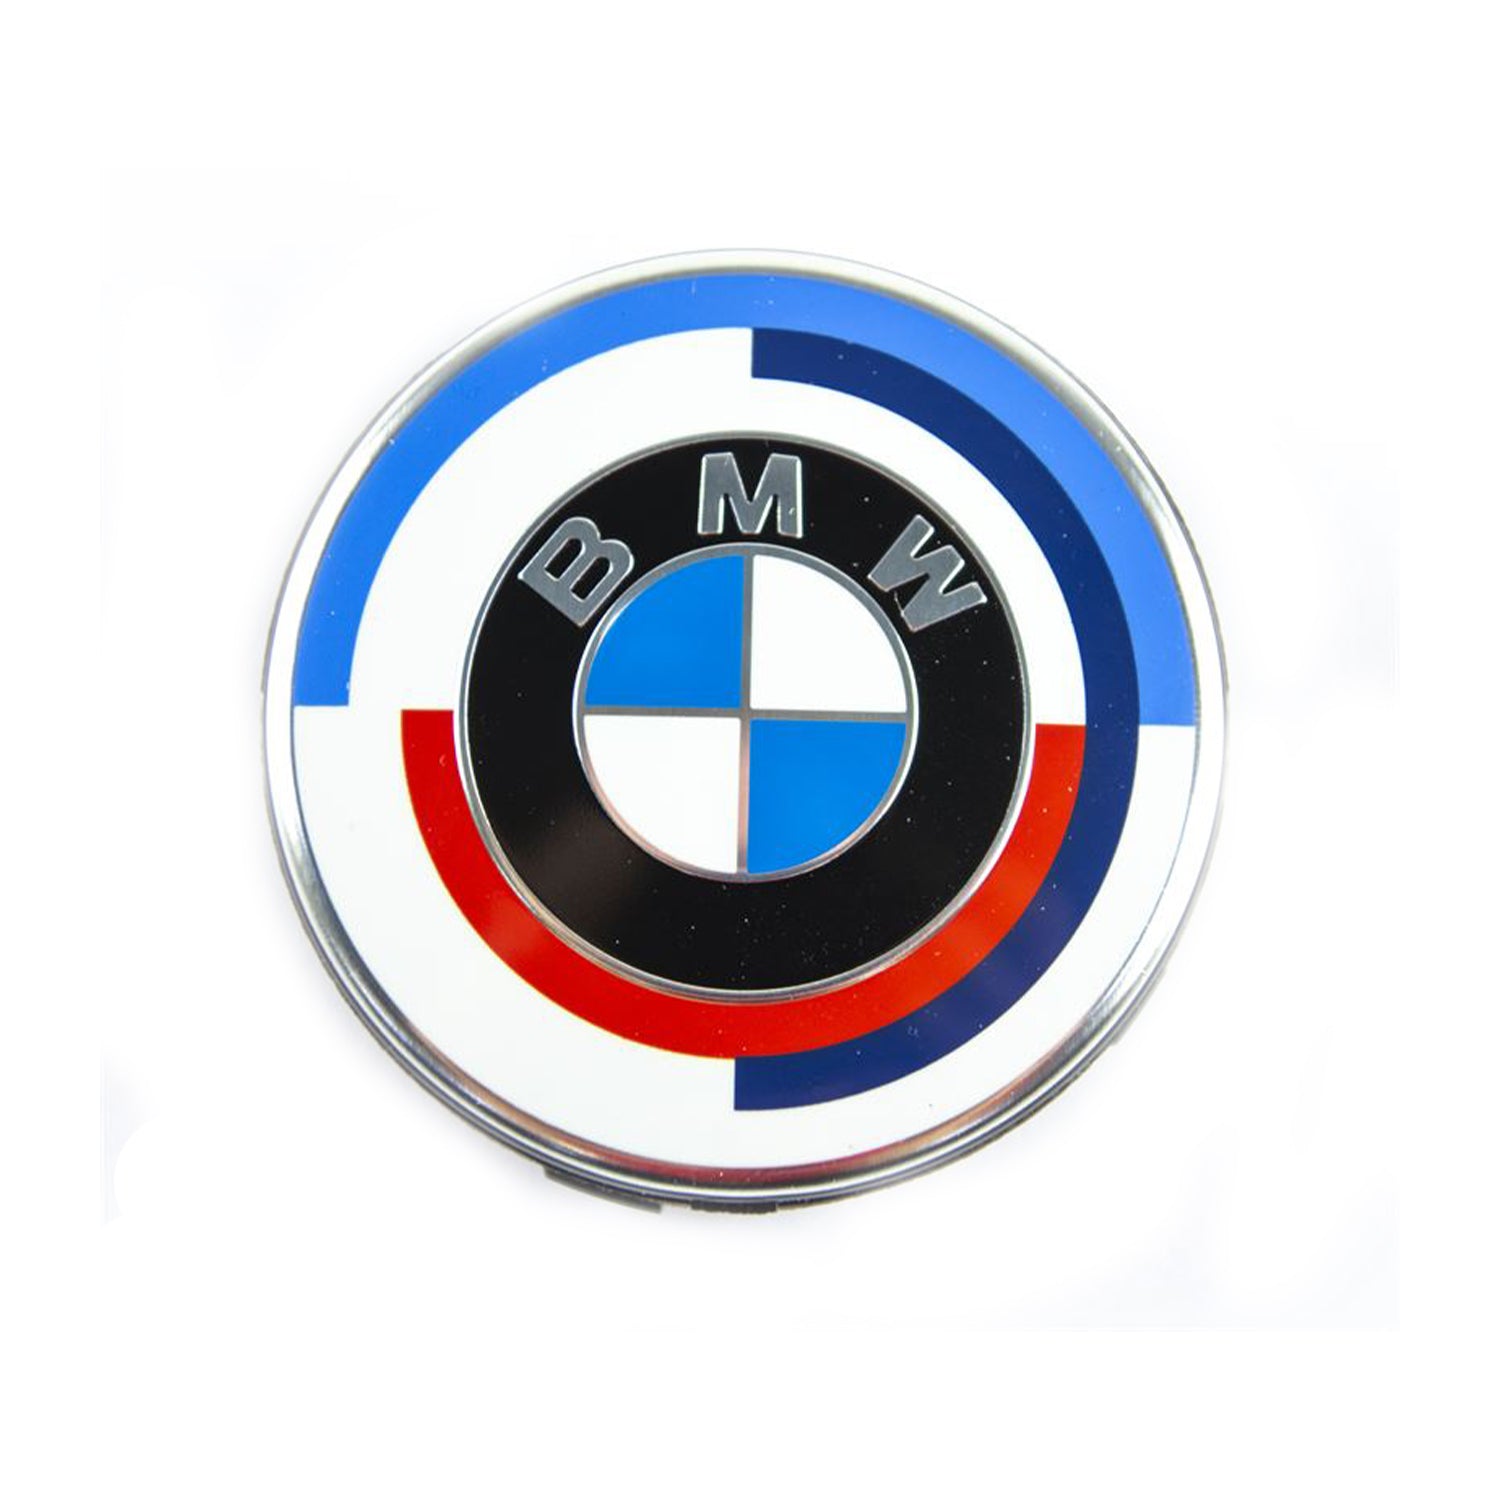 Genuine BMW 36125A57484 M 50th Anniversary Centre Caps 50mm Available at R44 Performance